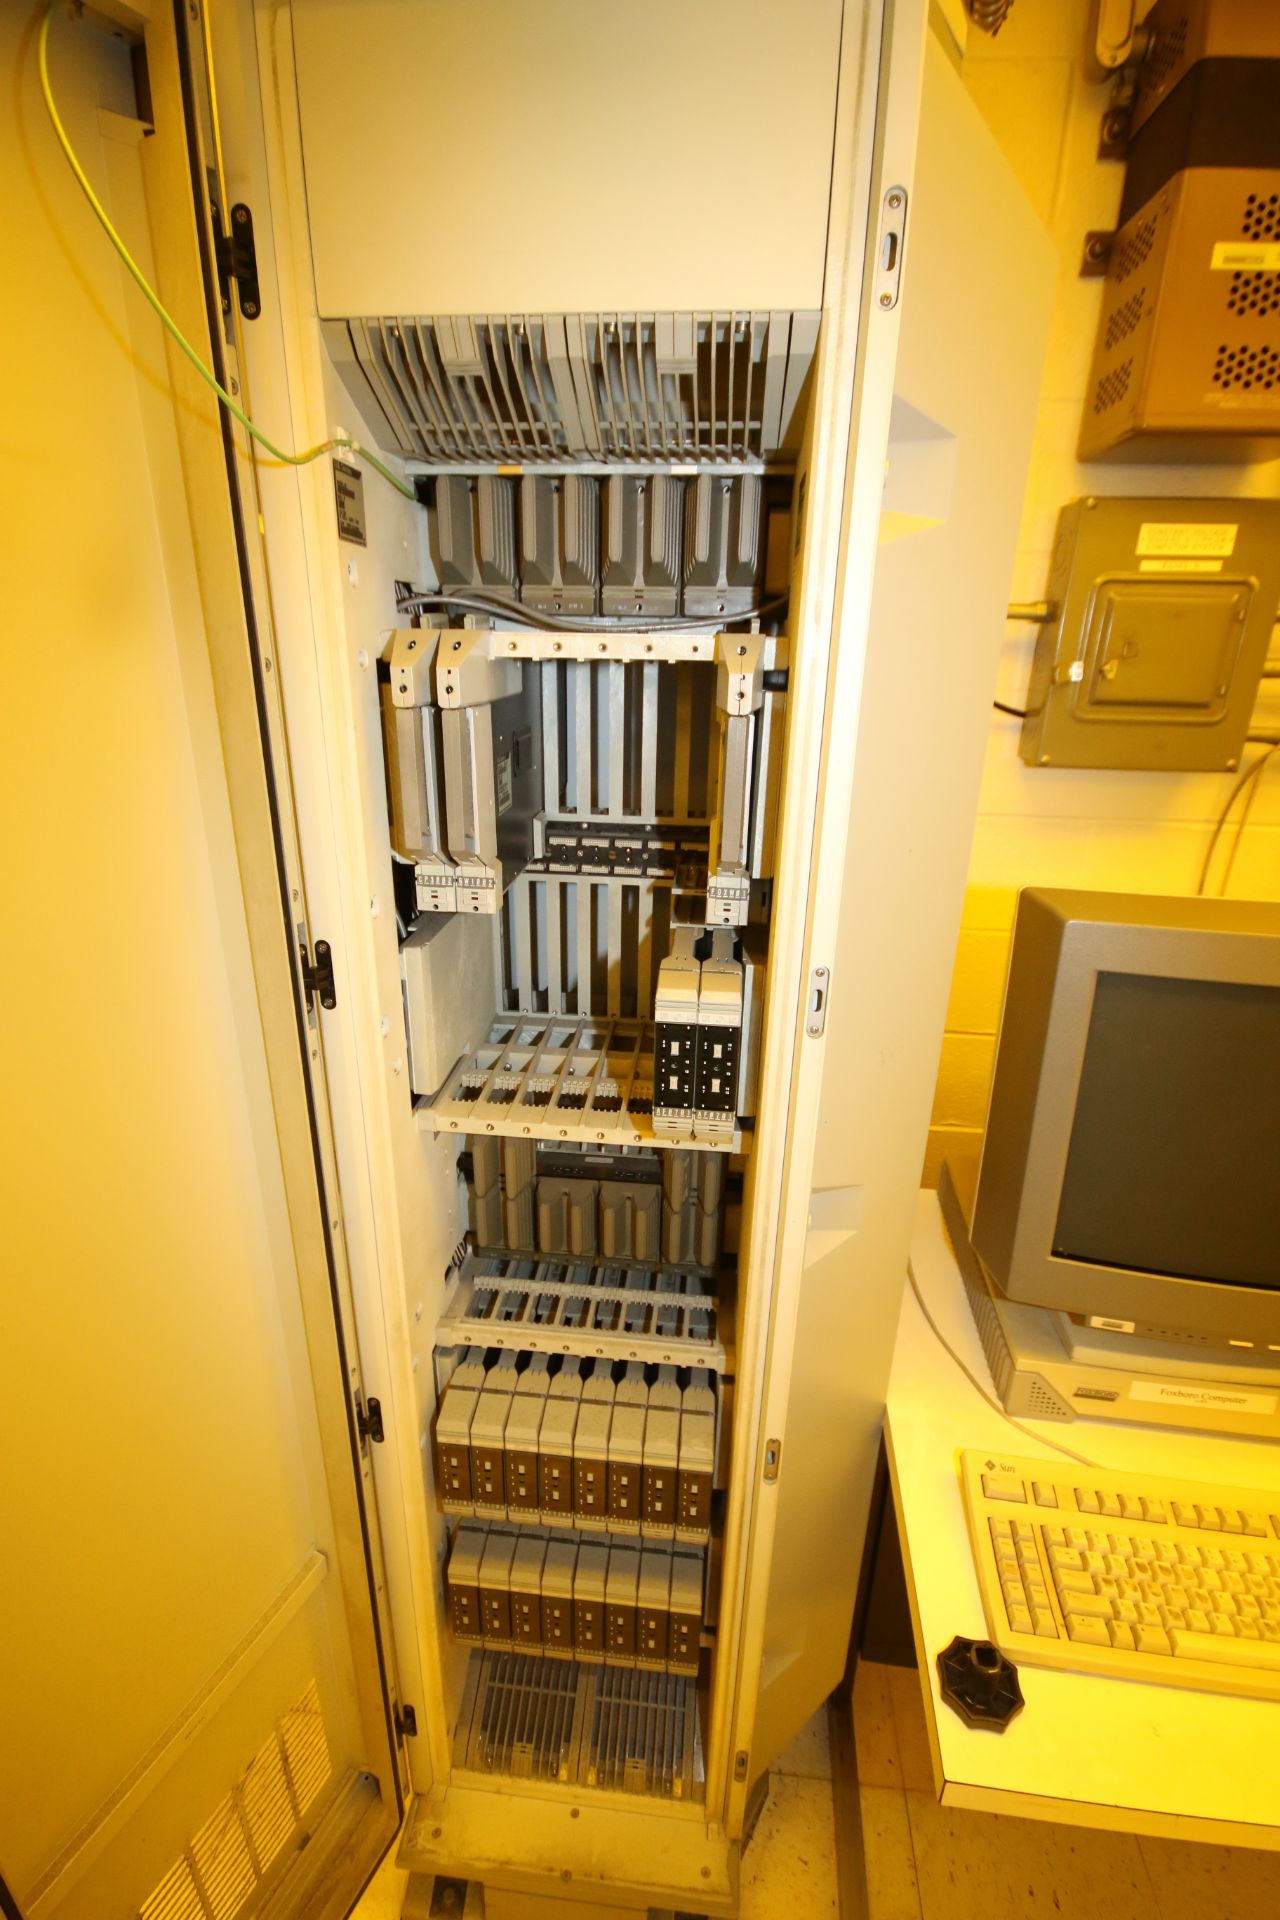 Foxboro IA Series Dryer and Other Line Control Cabinets with Computer System and Desk (Located in - Image 4 of 7